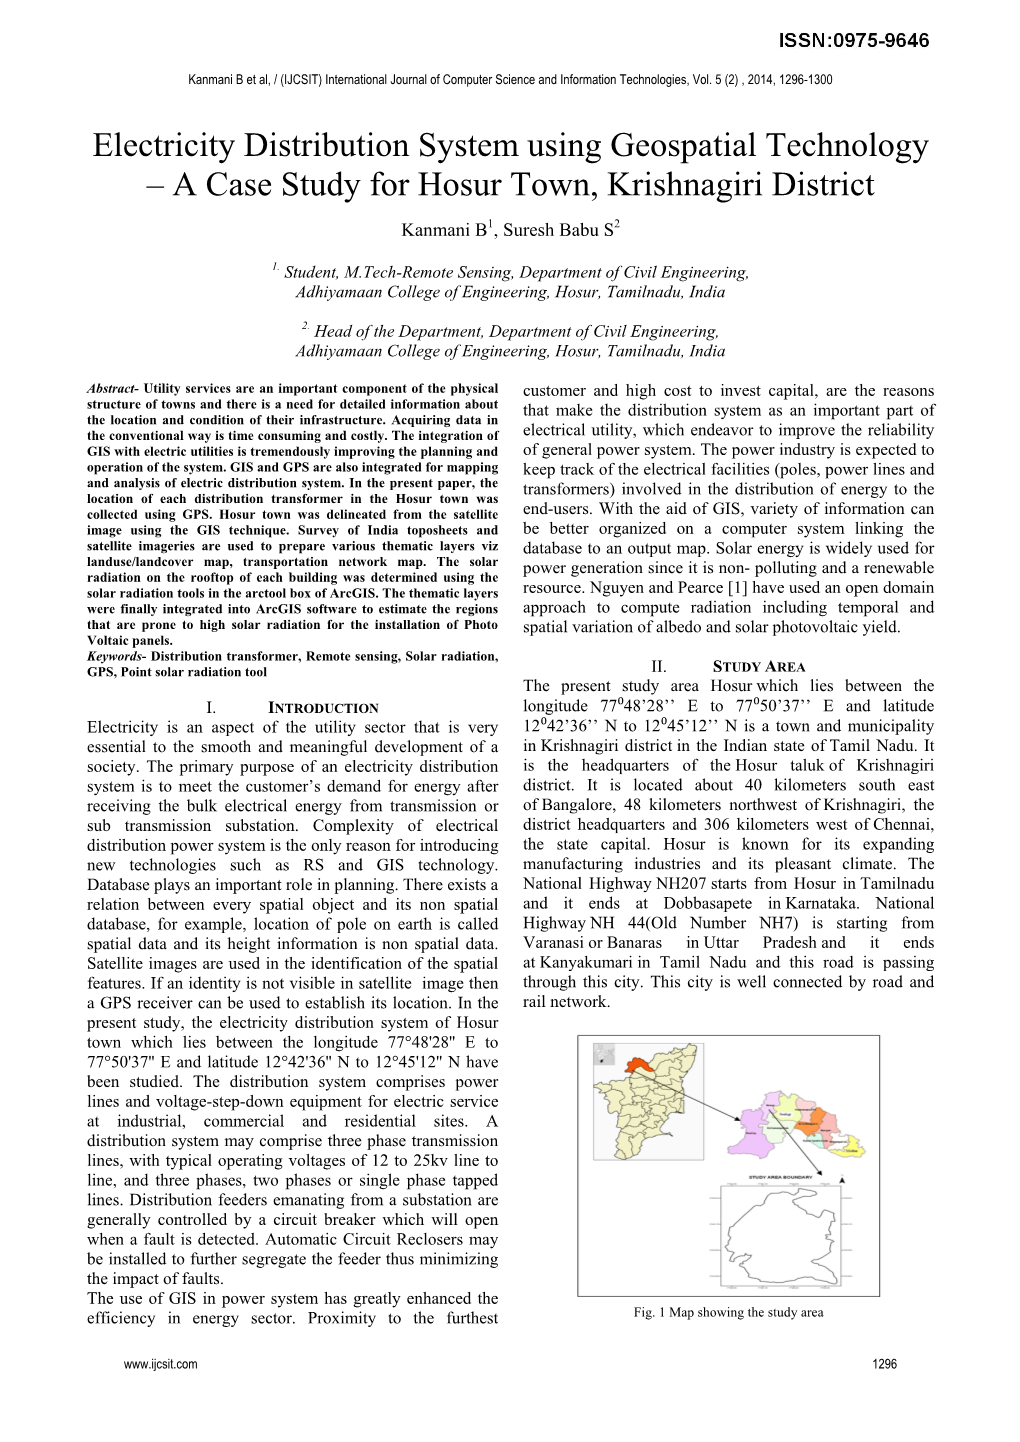 Electricity Distribution System Using Geospatial Technology – a Case Study for Hosur Town, Krishnagiri District